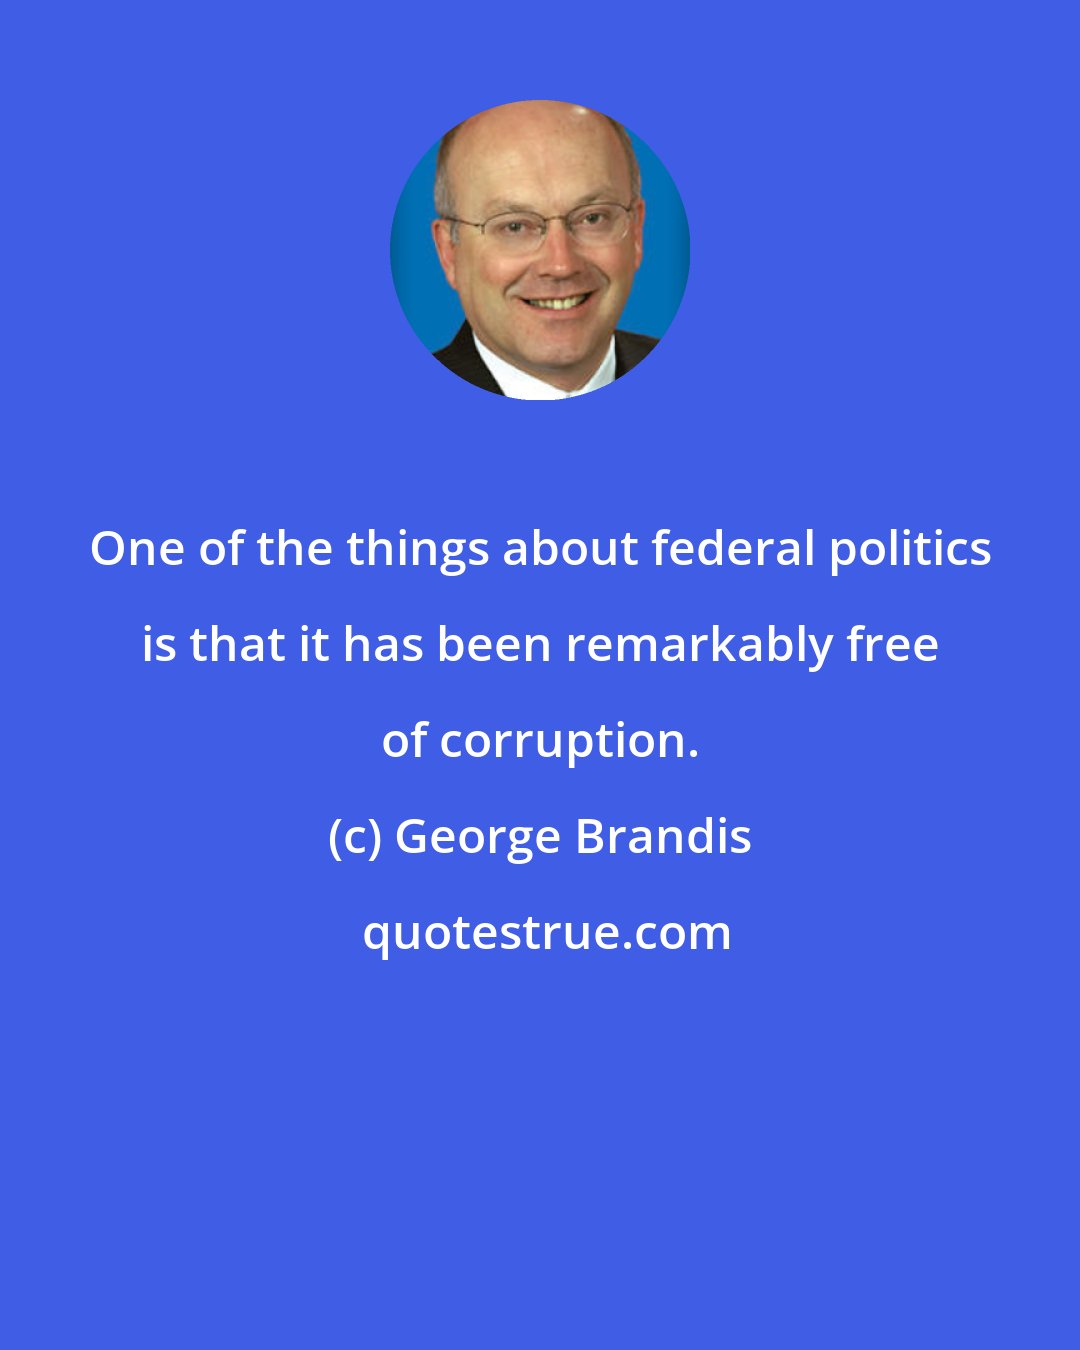 George Brandis: One of the things about federal politics is that it has been remarkably free of corruption.